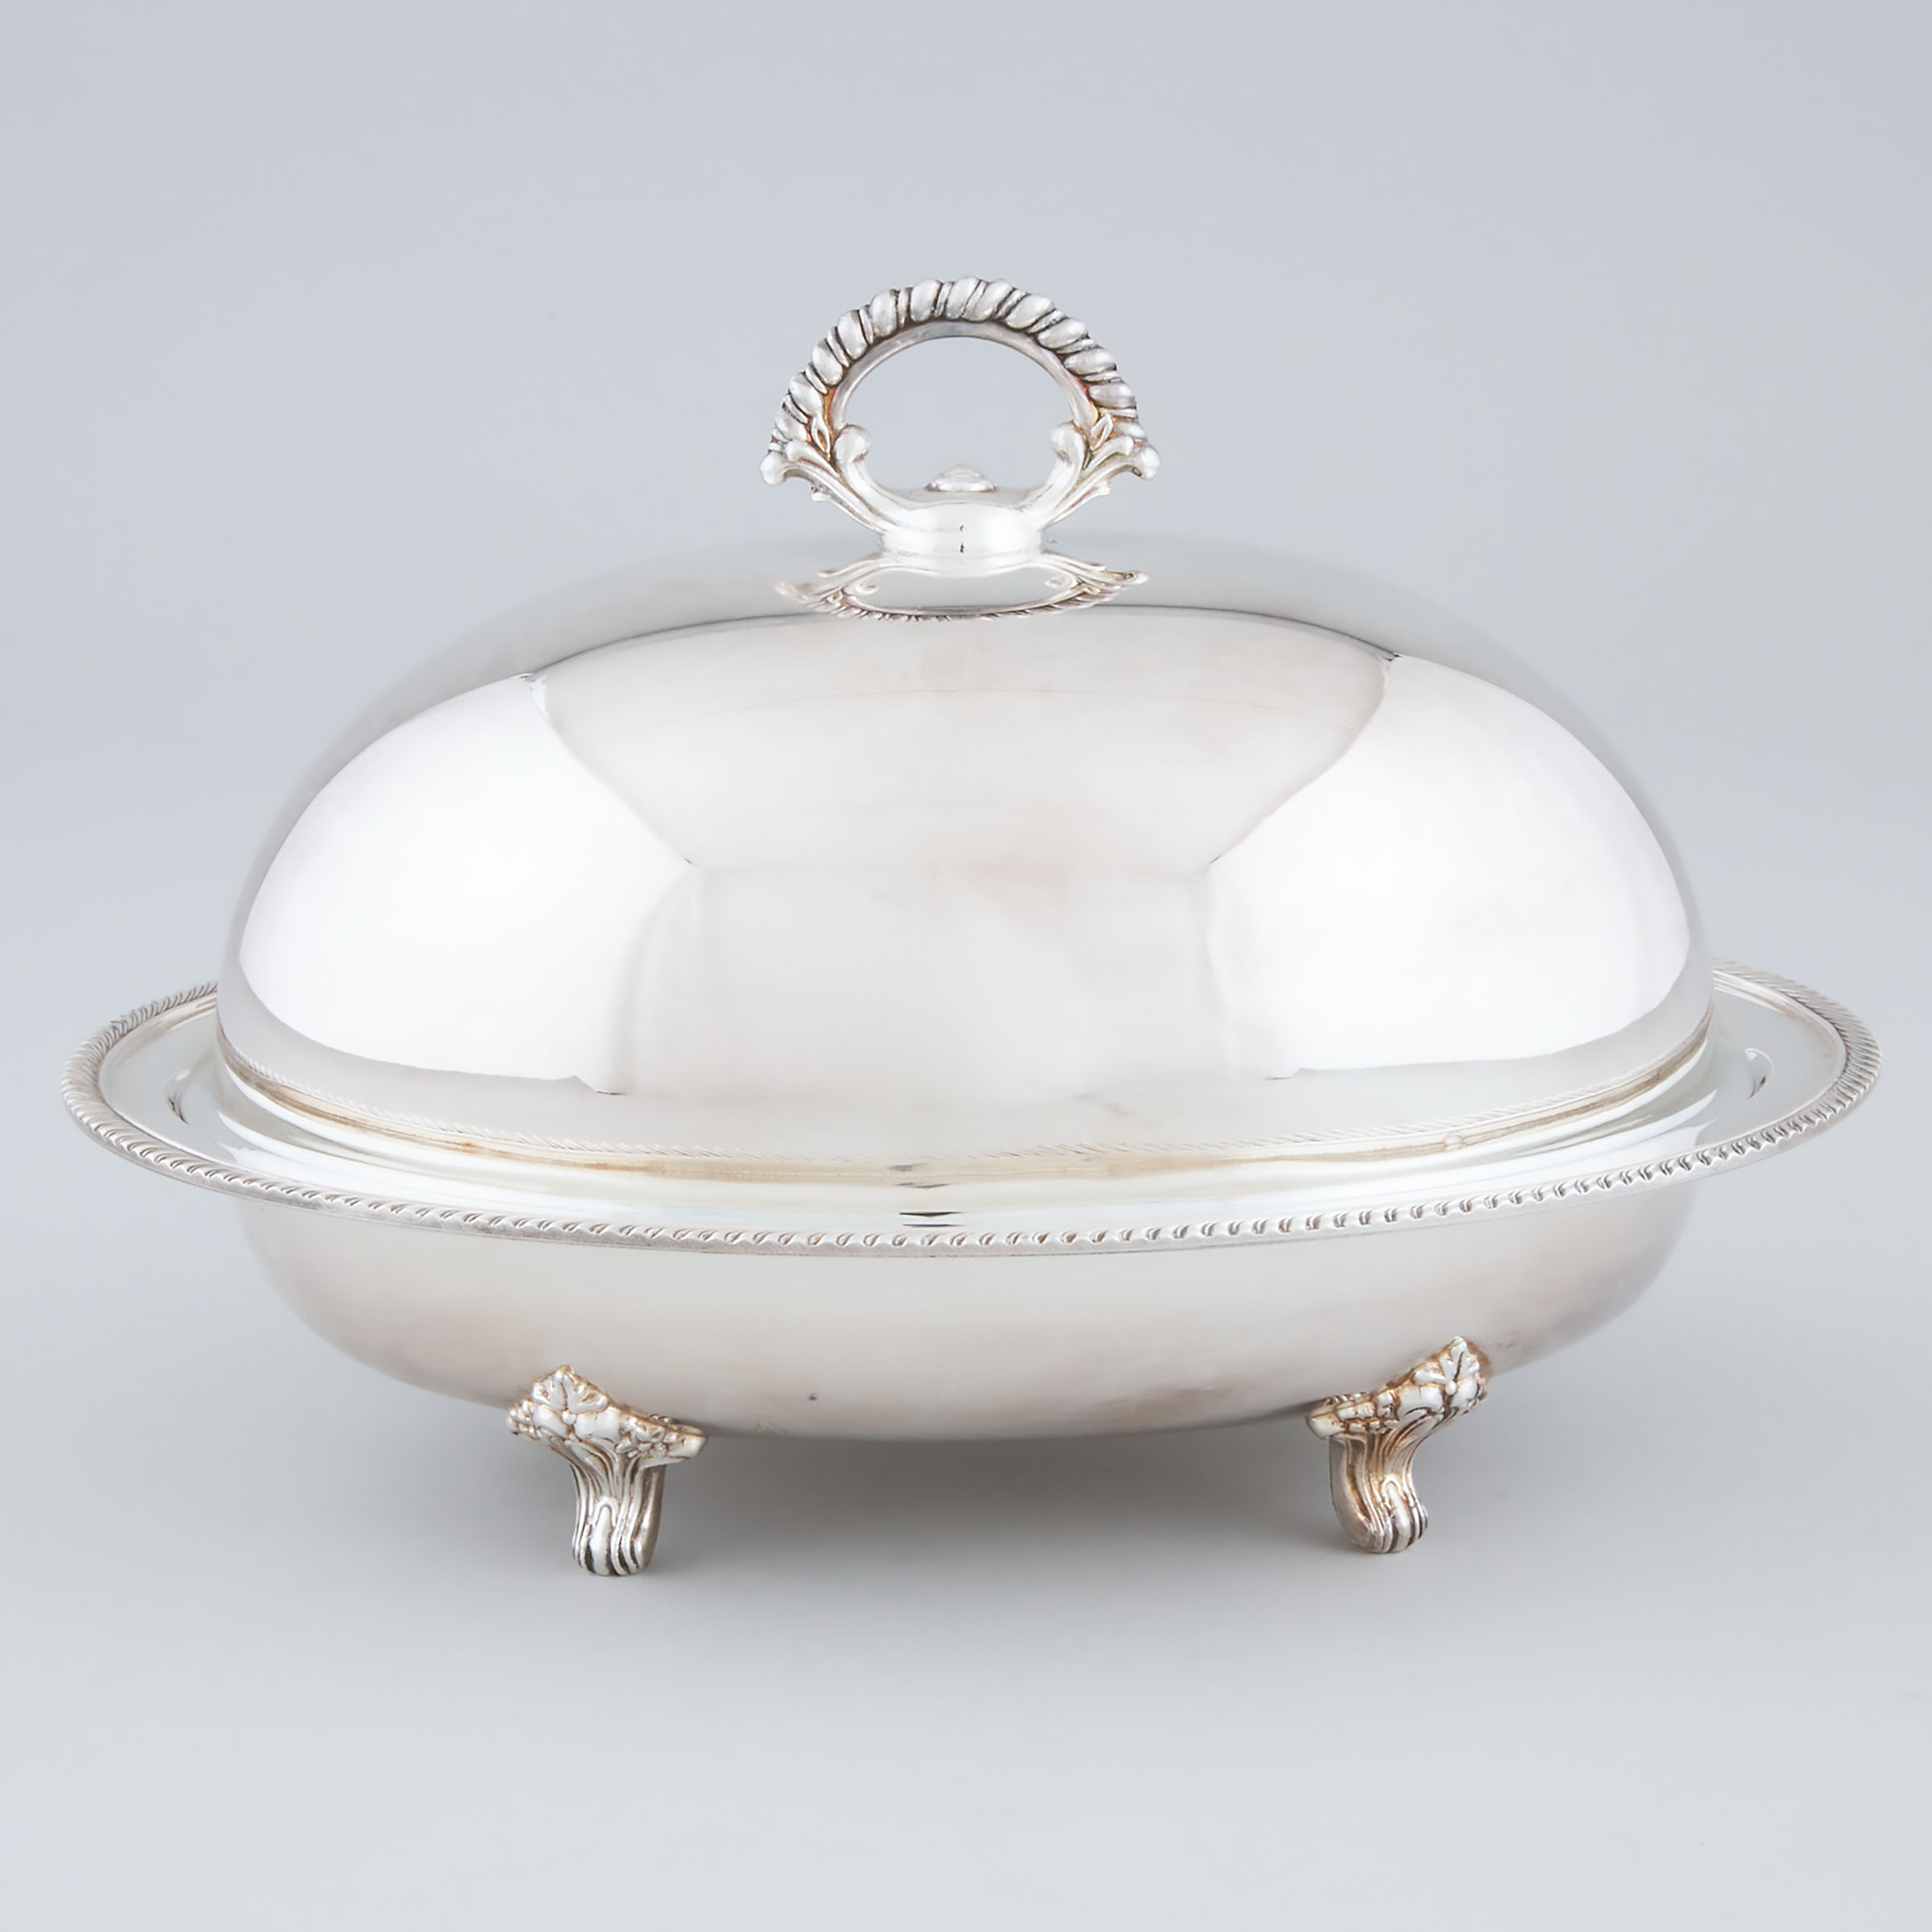 Canadian Silver Plated Serving Dish and Domed Cover, W.M. Rogers, 20th century